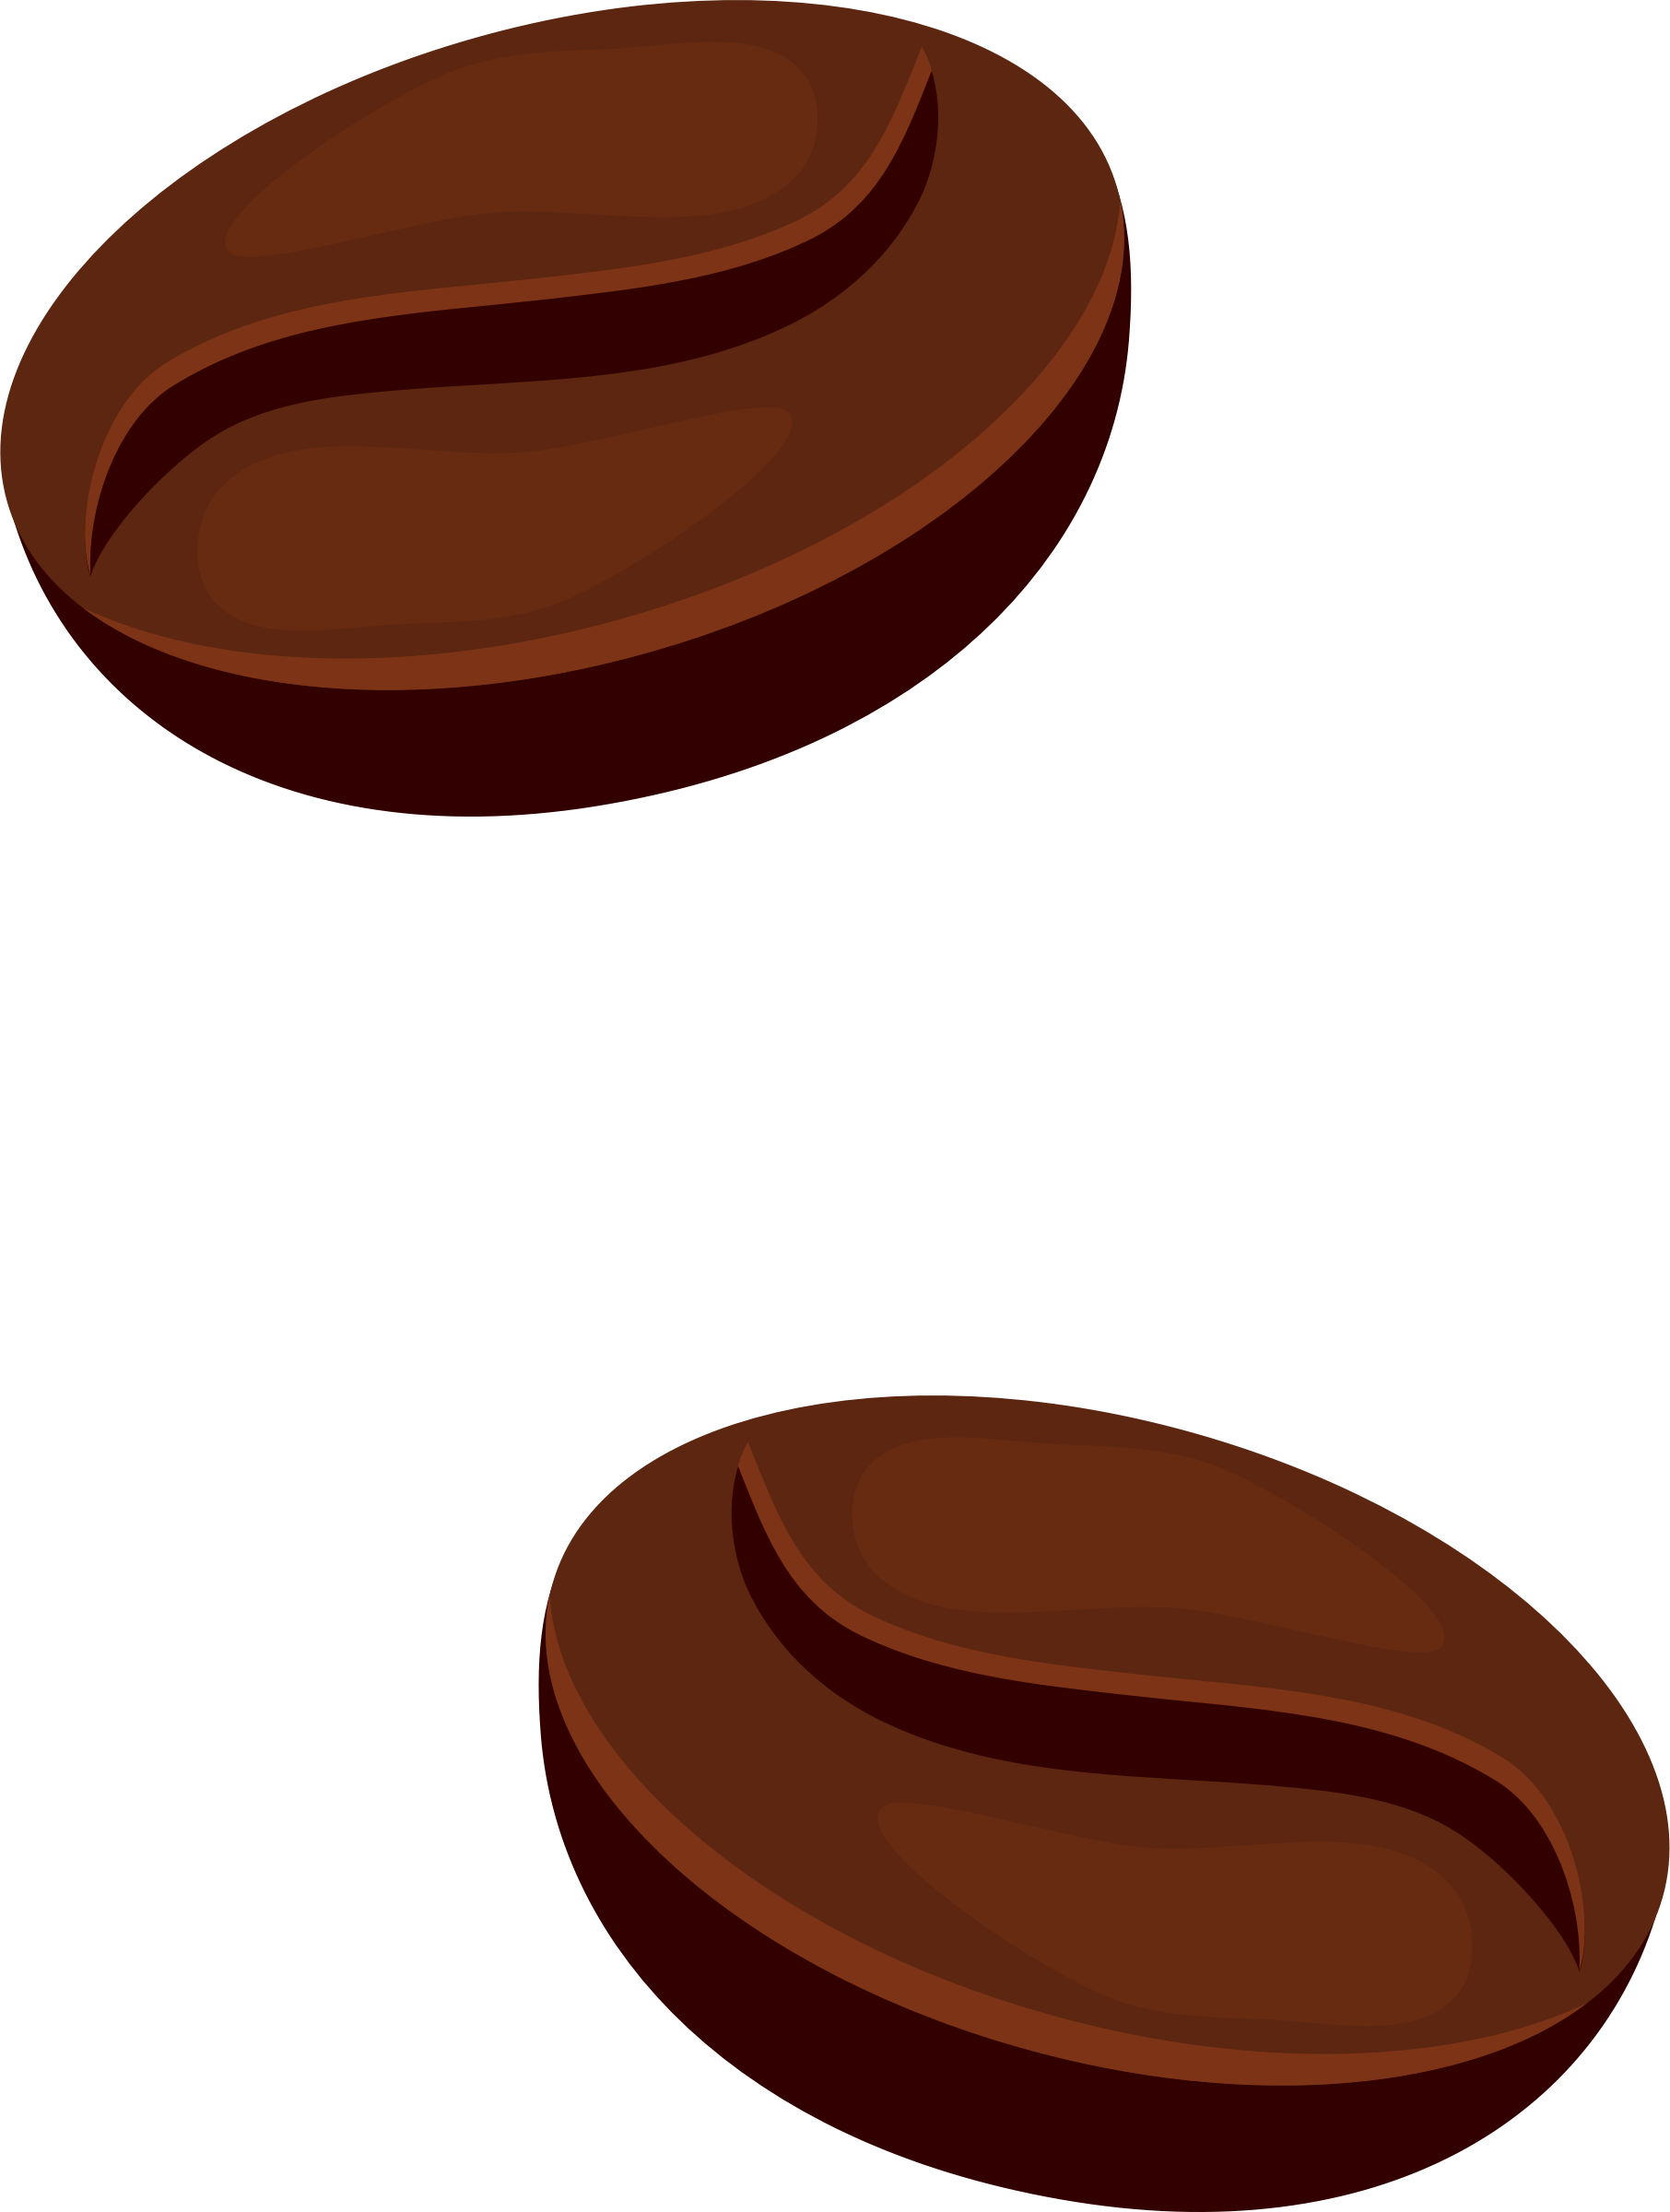 Free Coffee Bean Graphic, Download Free Coffee Bean Graphic png images